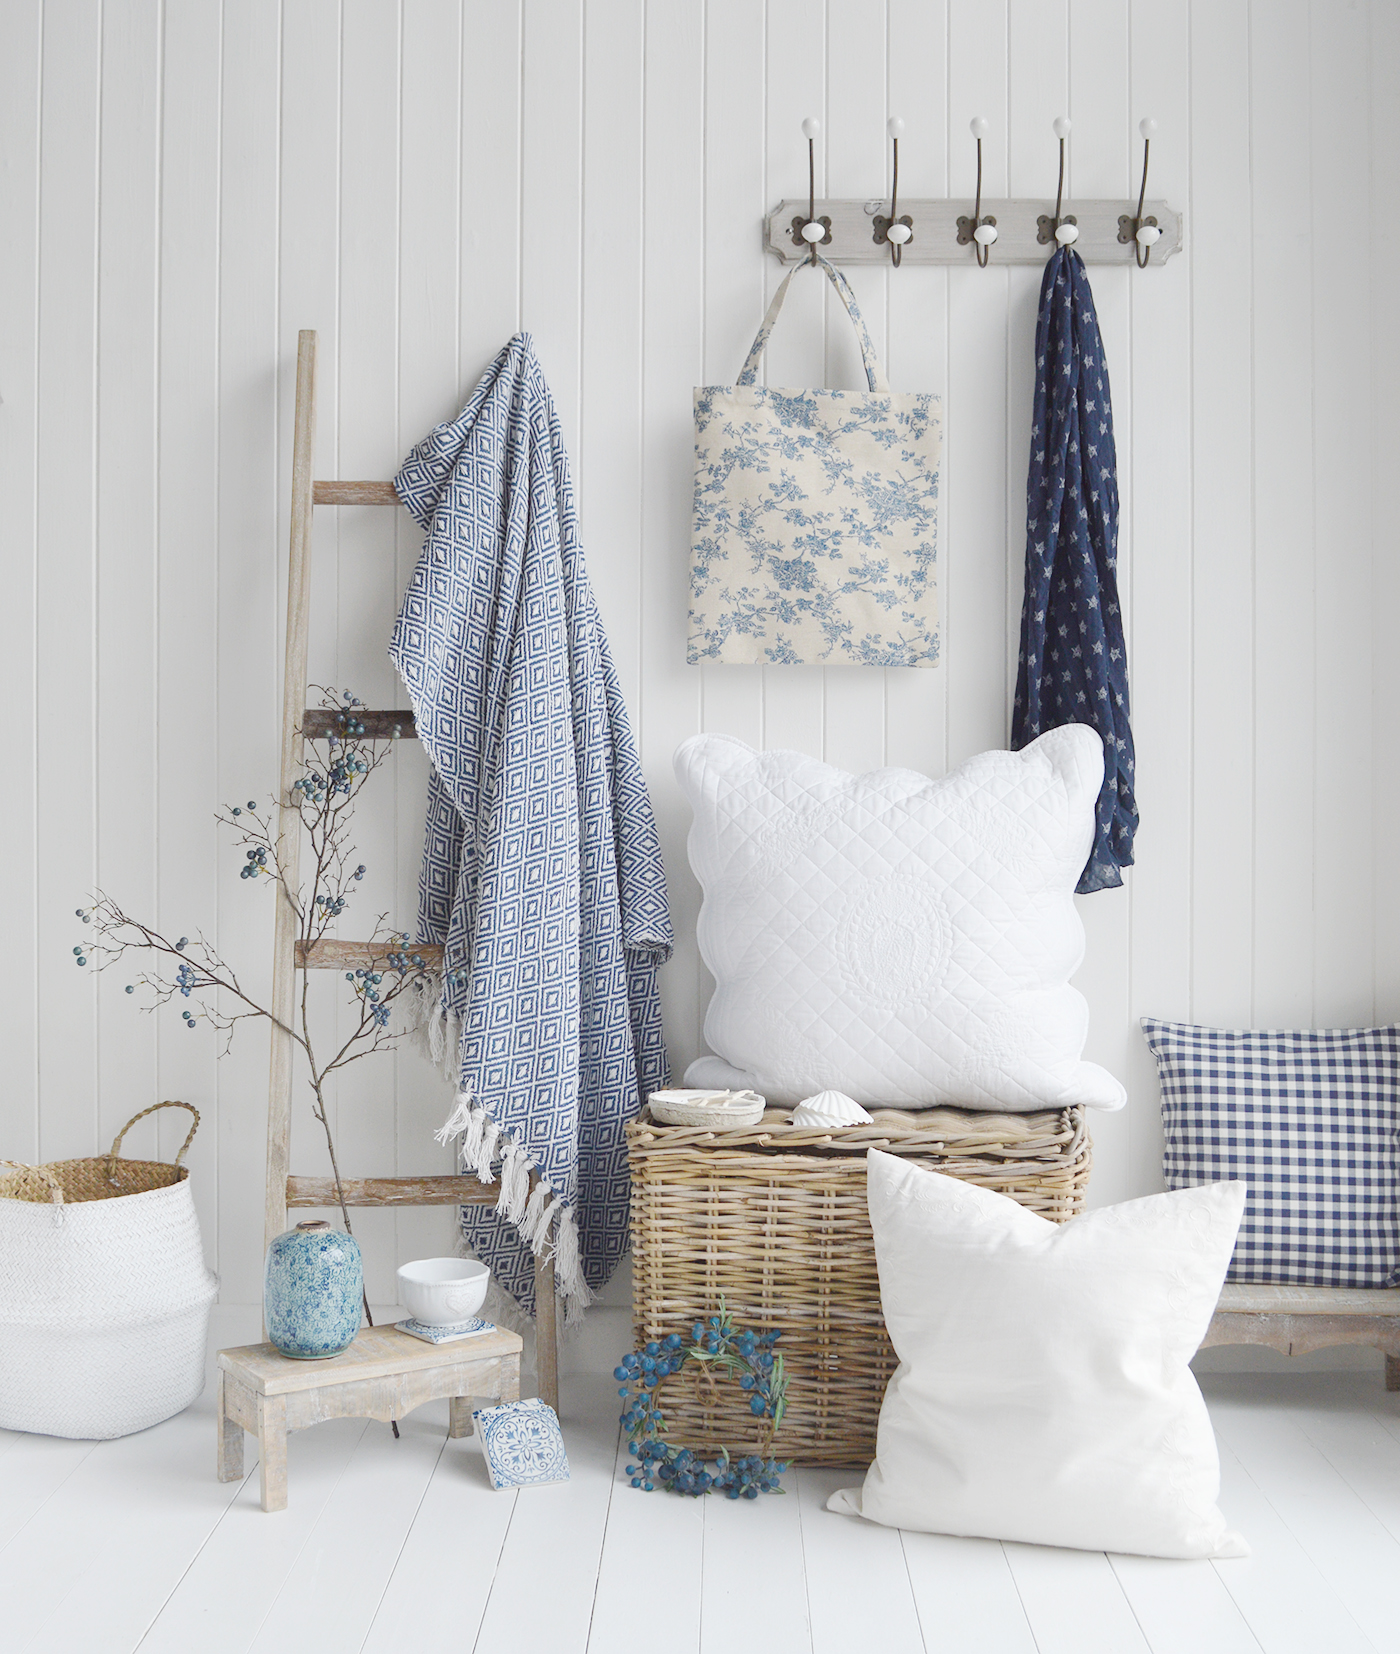 New England Style White Furniture and accessories for the home. Coastal, country and modern farmhouse interiors and furniture. Hampshire Blue and White Throw Blanket